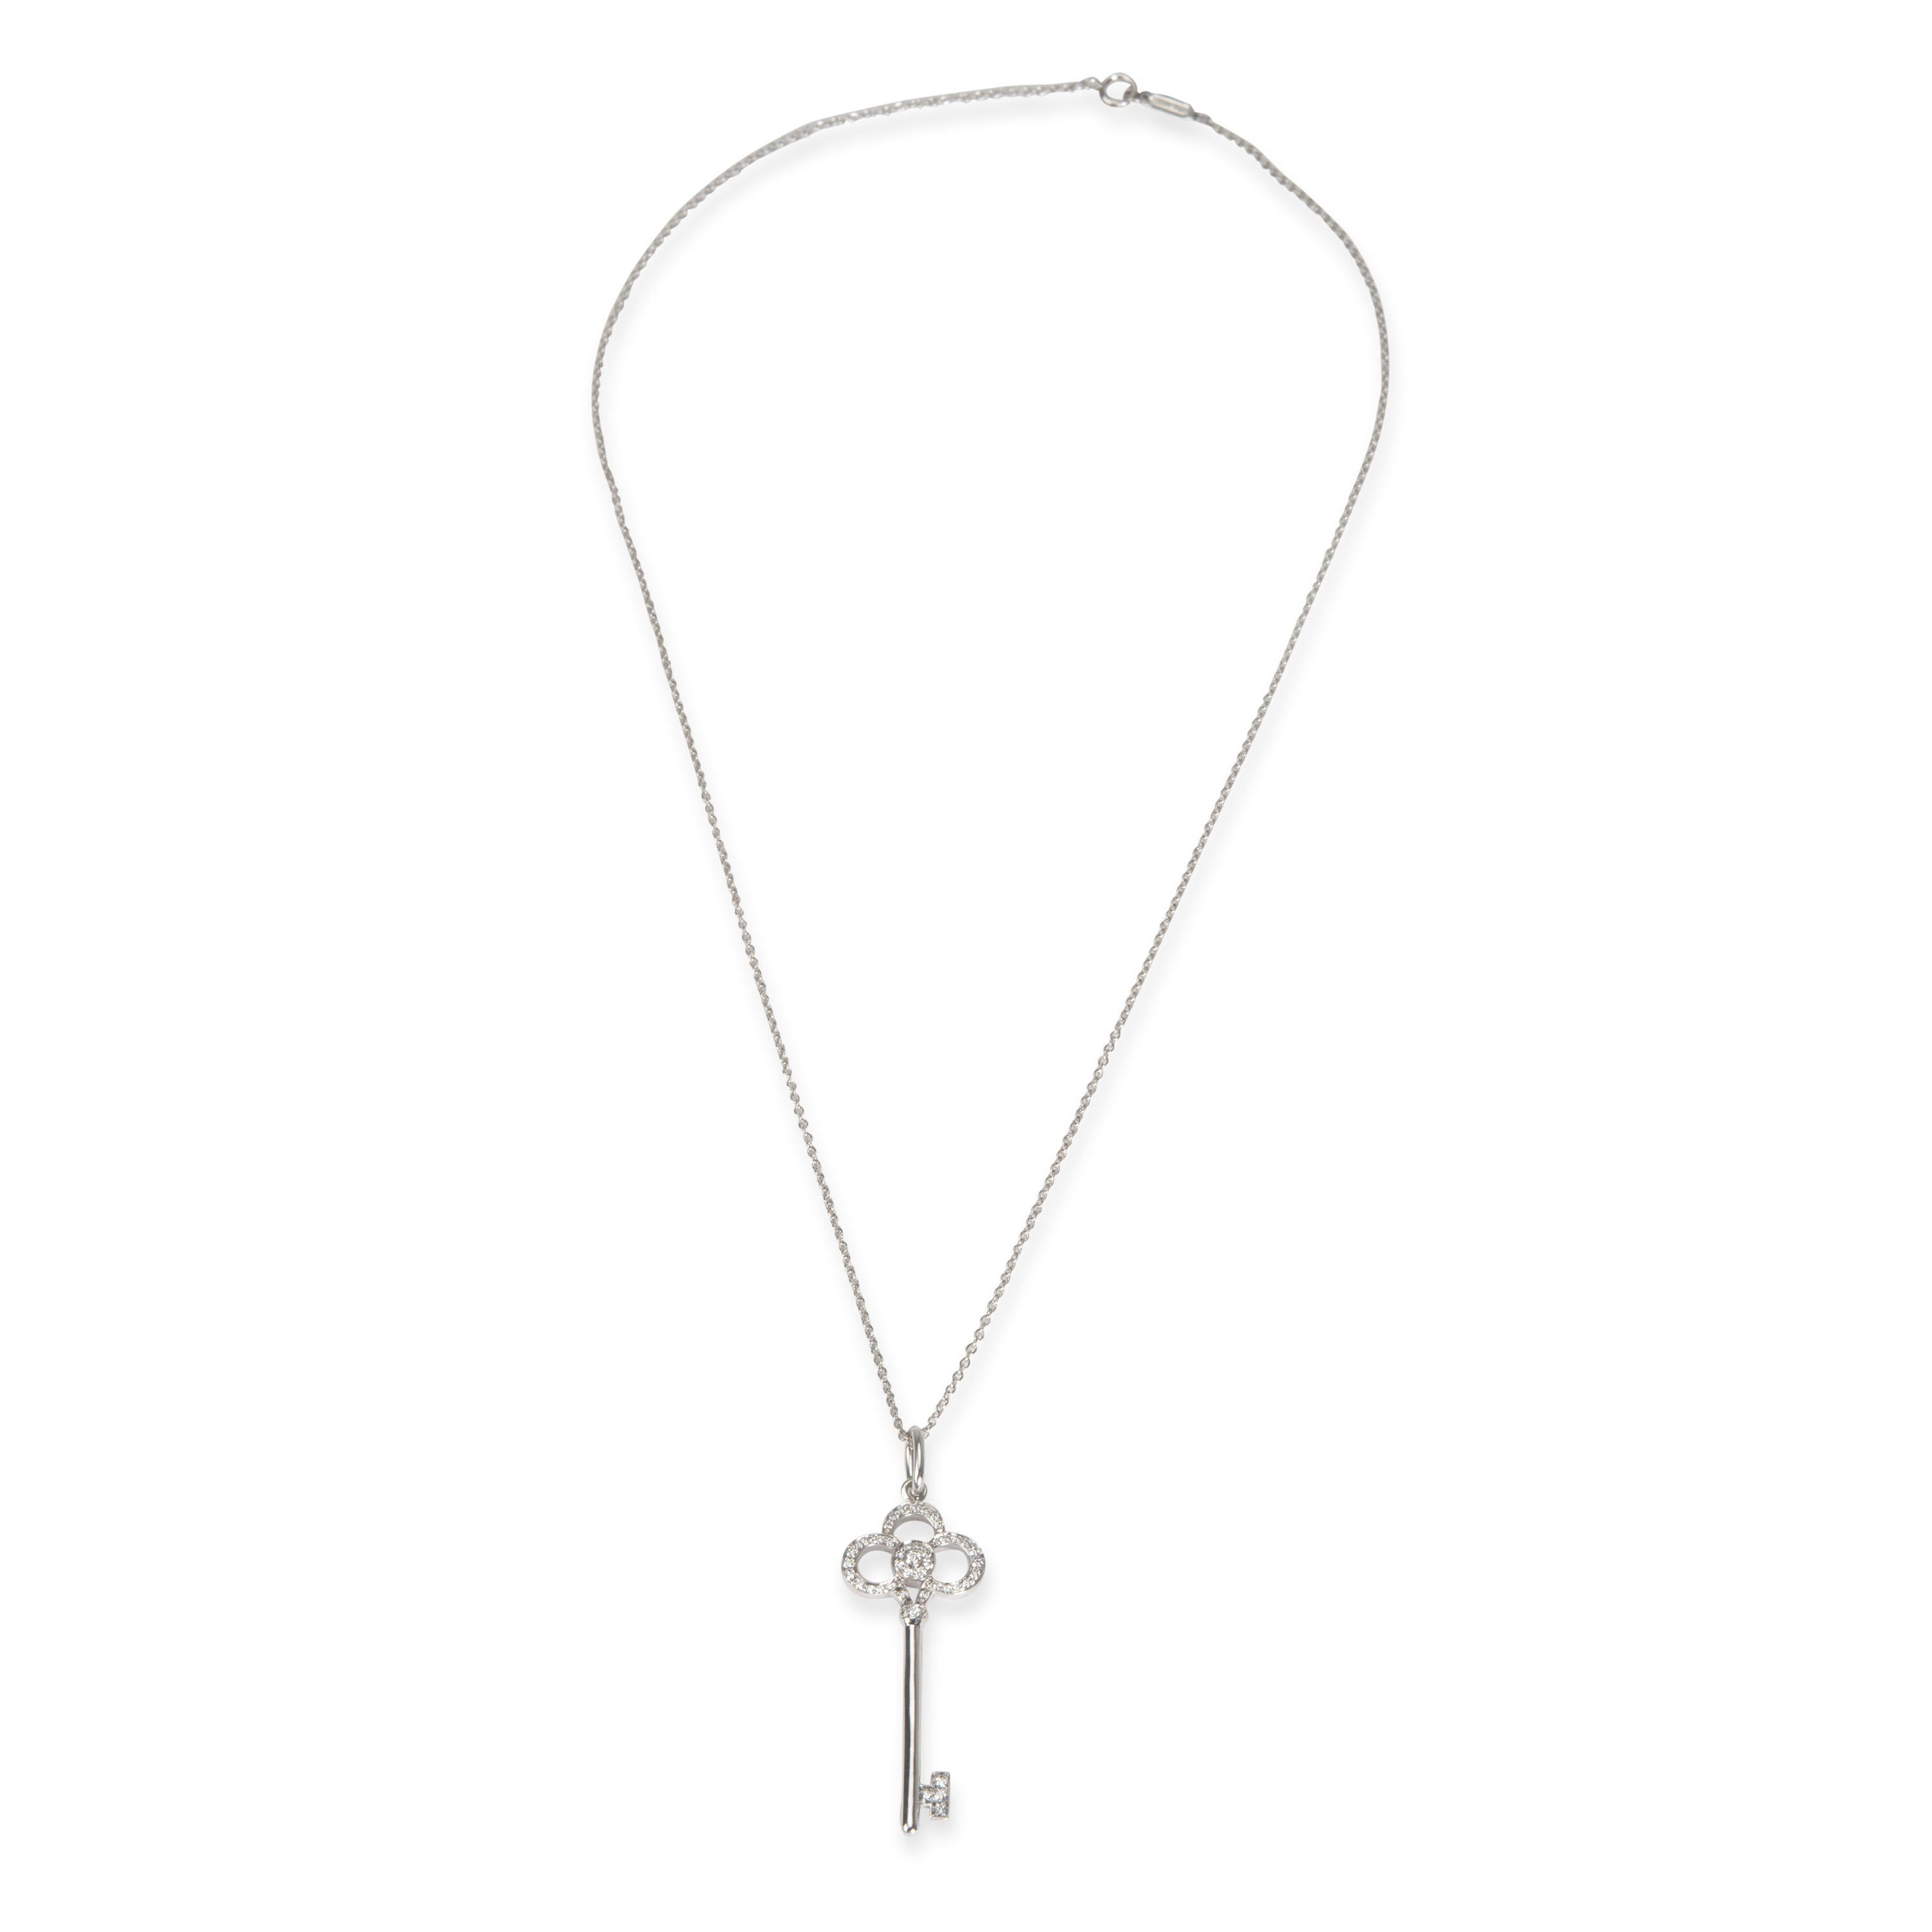 Tiffany & Co. Crown Key Diamond Pendant in 18K White Gold 0.22 CTW

PRIMARY DETAILS
SKU: 101679
Listing Title: Tiffany & Co. Crown Key Diamond Pendant in 18K White Gold 0.22 CTW
Condition Description: Retails for 2875 USD. In excellent condition and